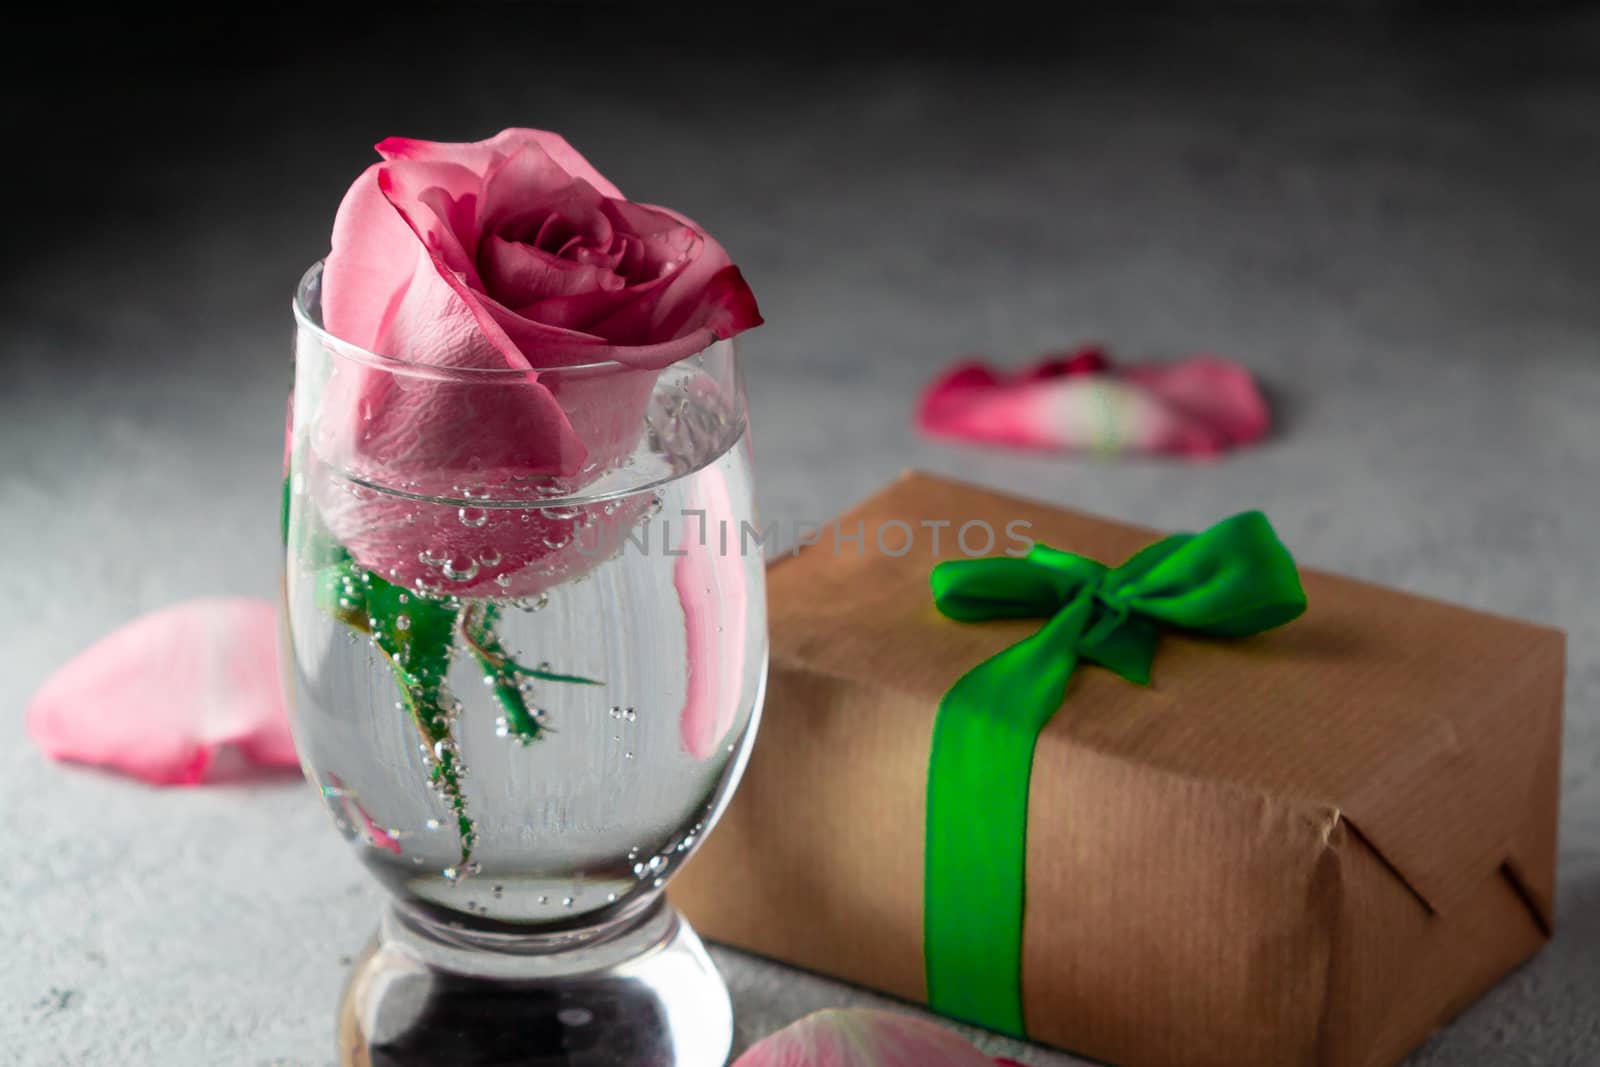 Pink rose in a glass of water, rose petals and a box with a gift on the table by galsand